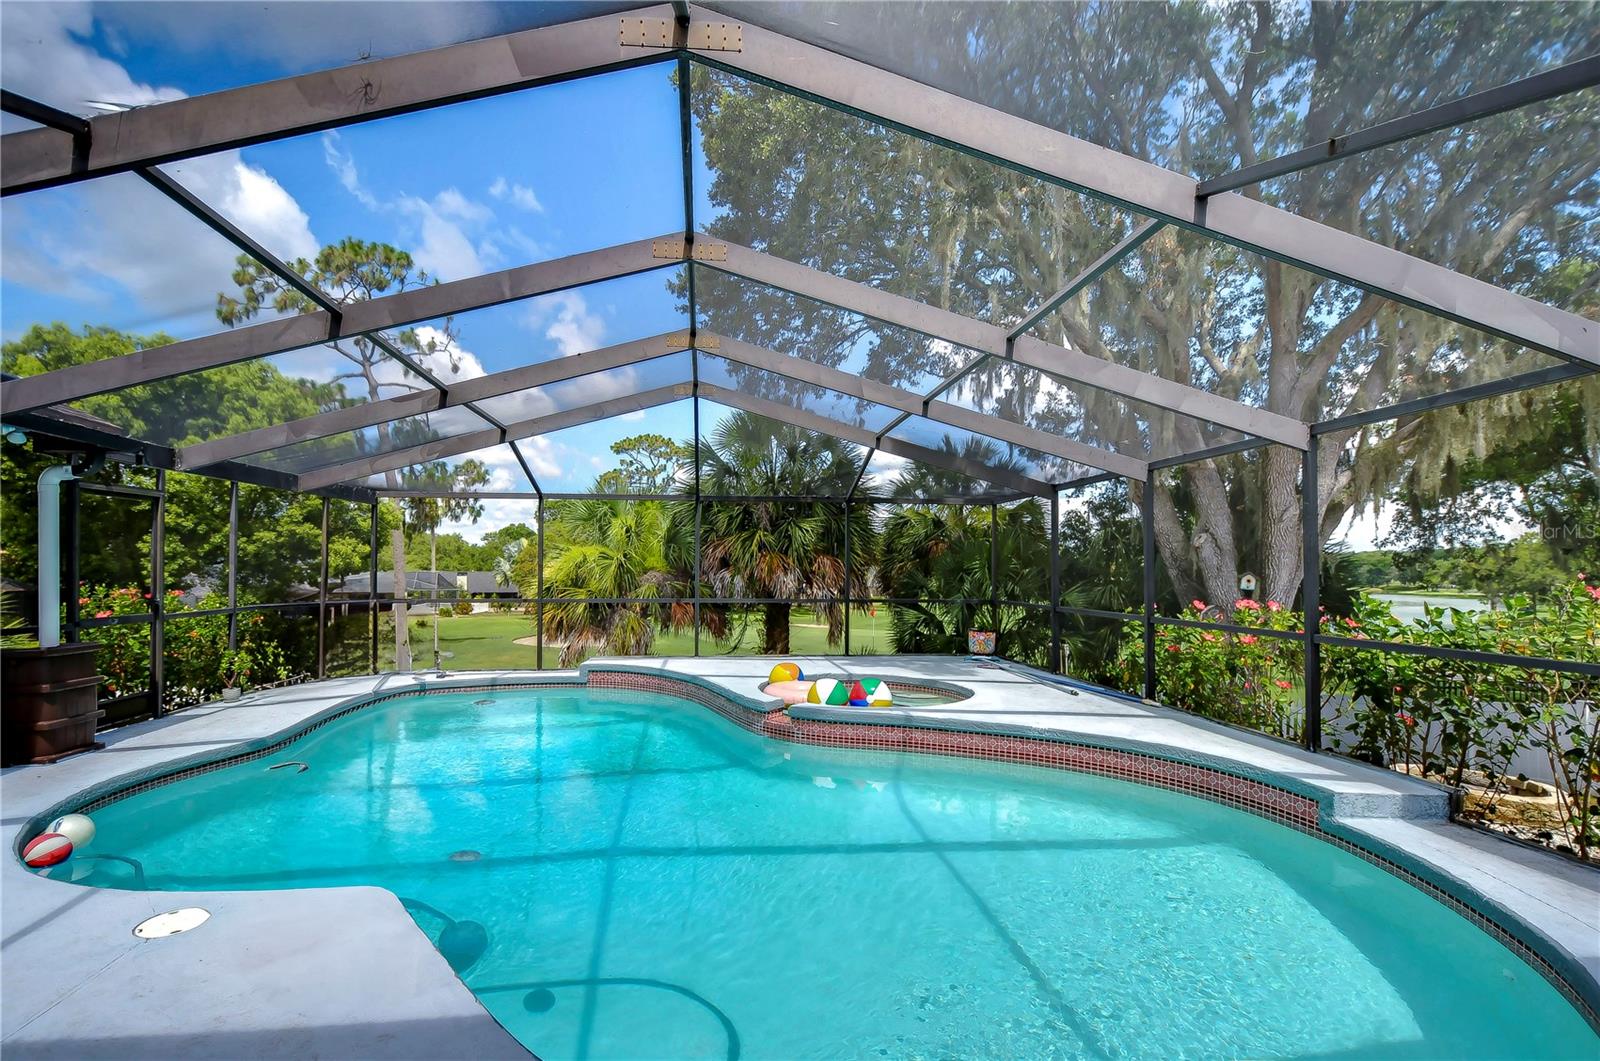 Enjoy the solar heated pool with golf course views!